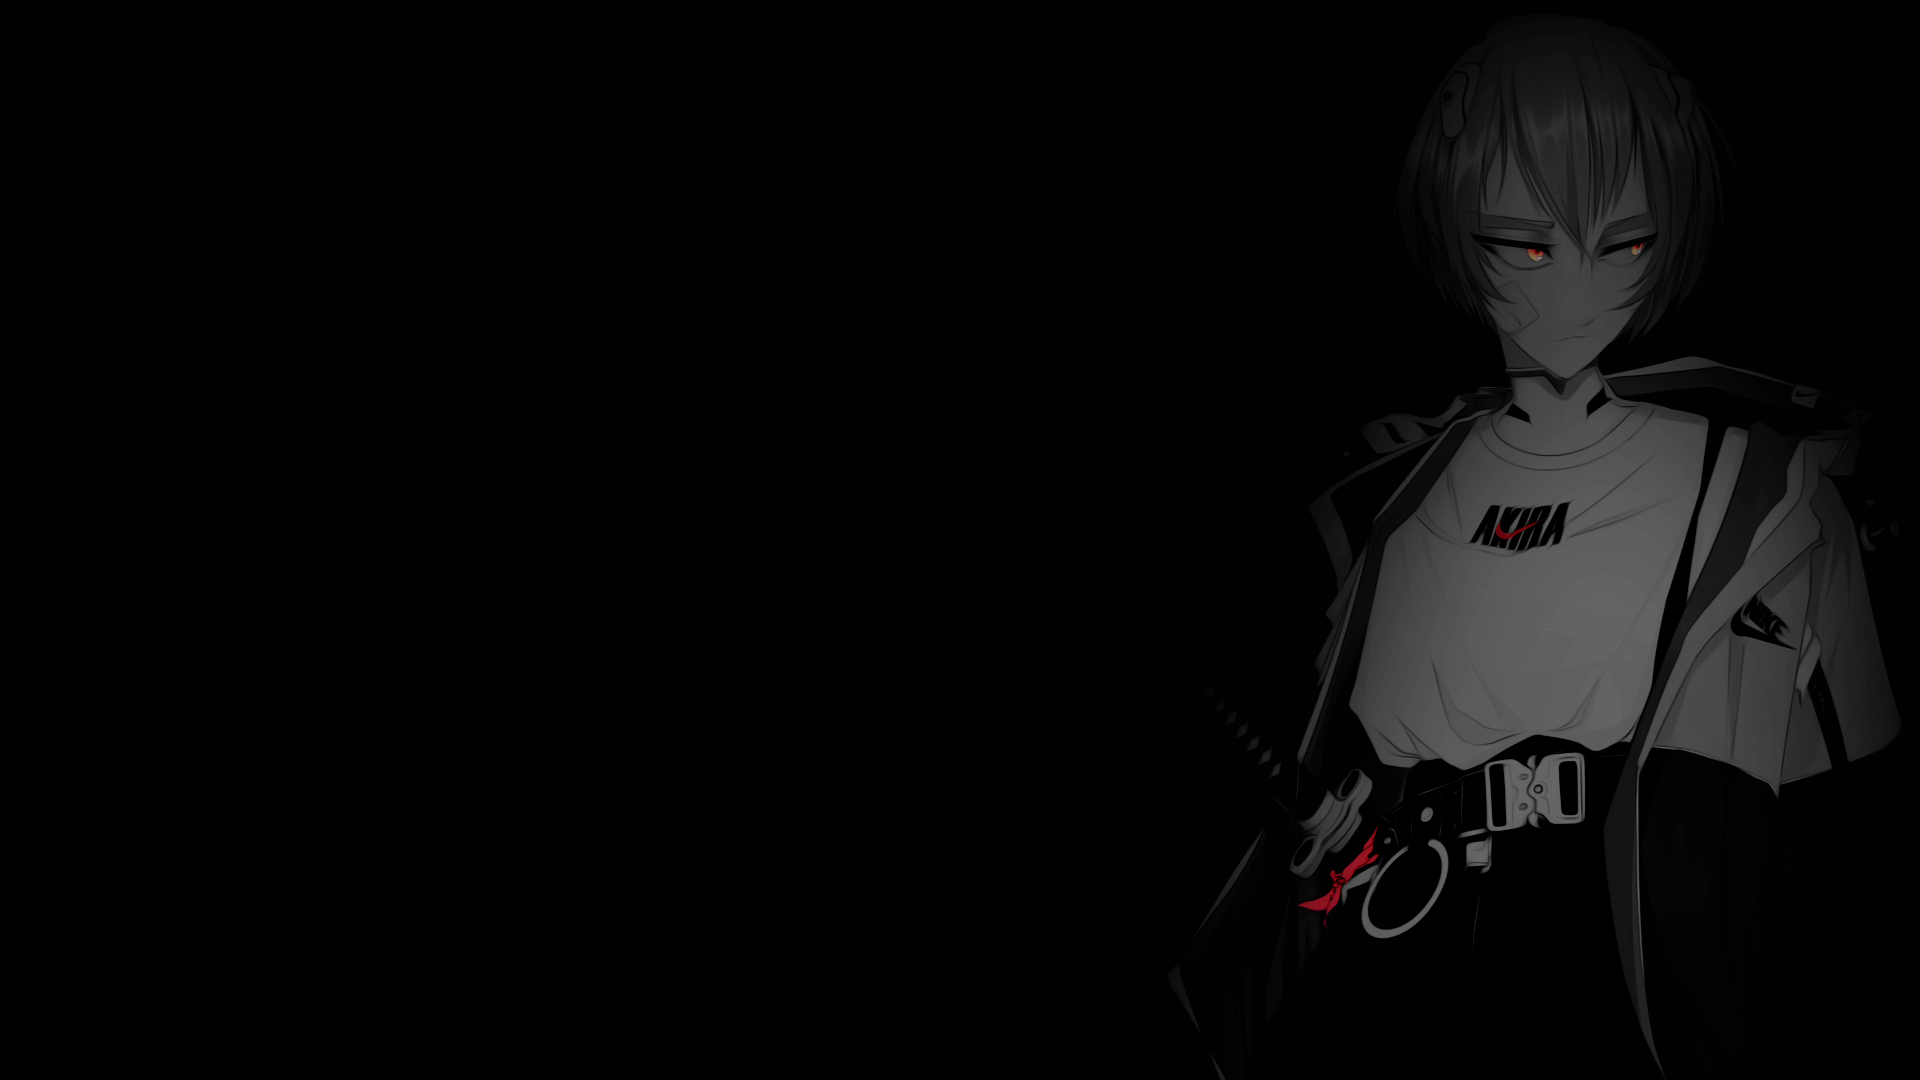 Anime 1920x1080 selective coloring black background dark background simple background anime girls